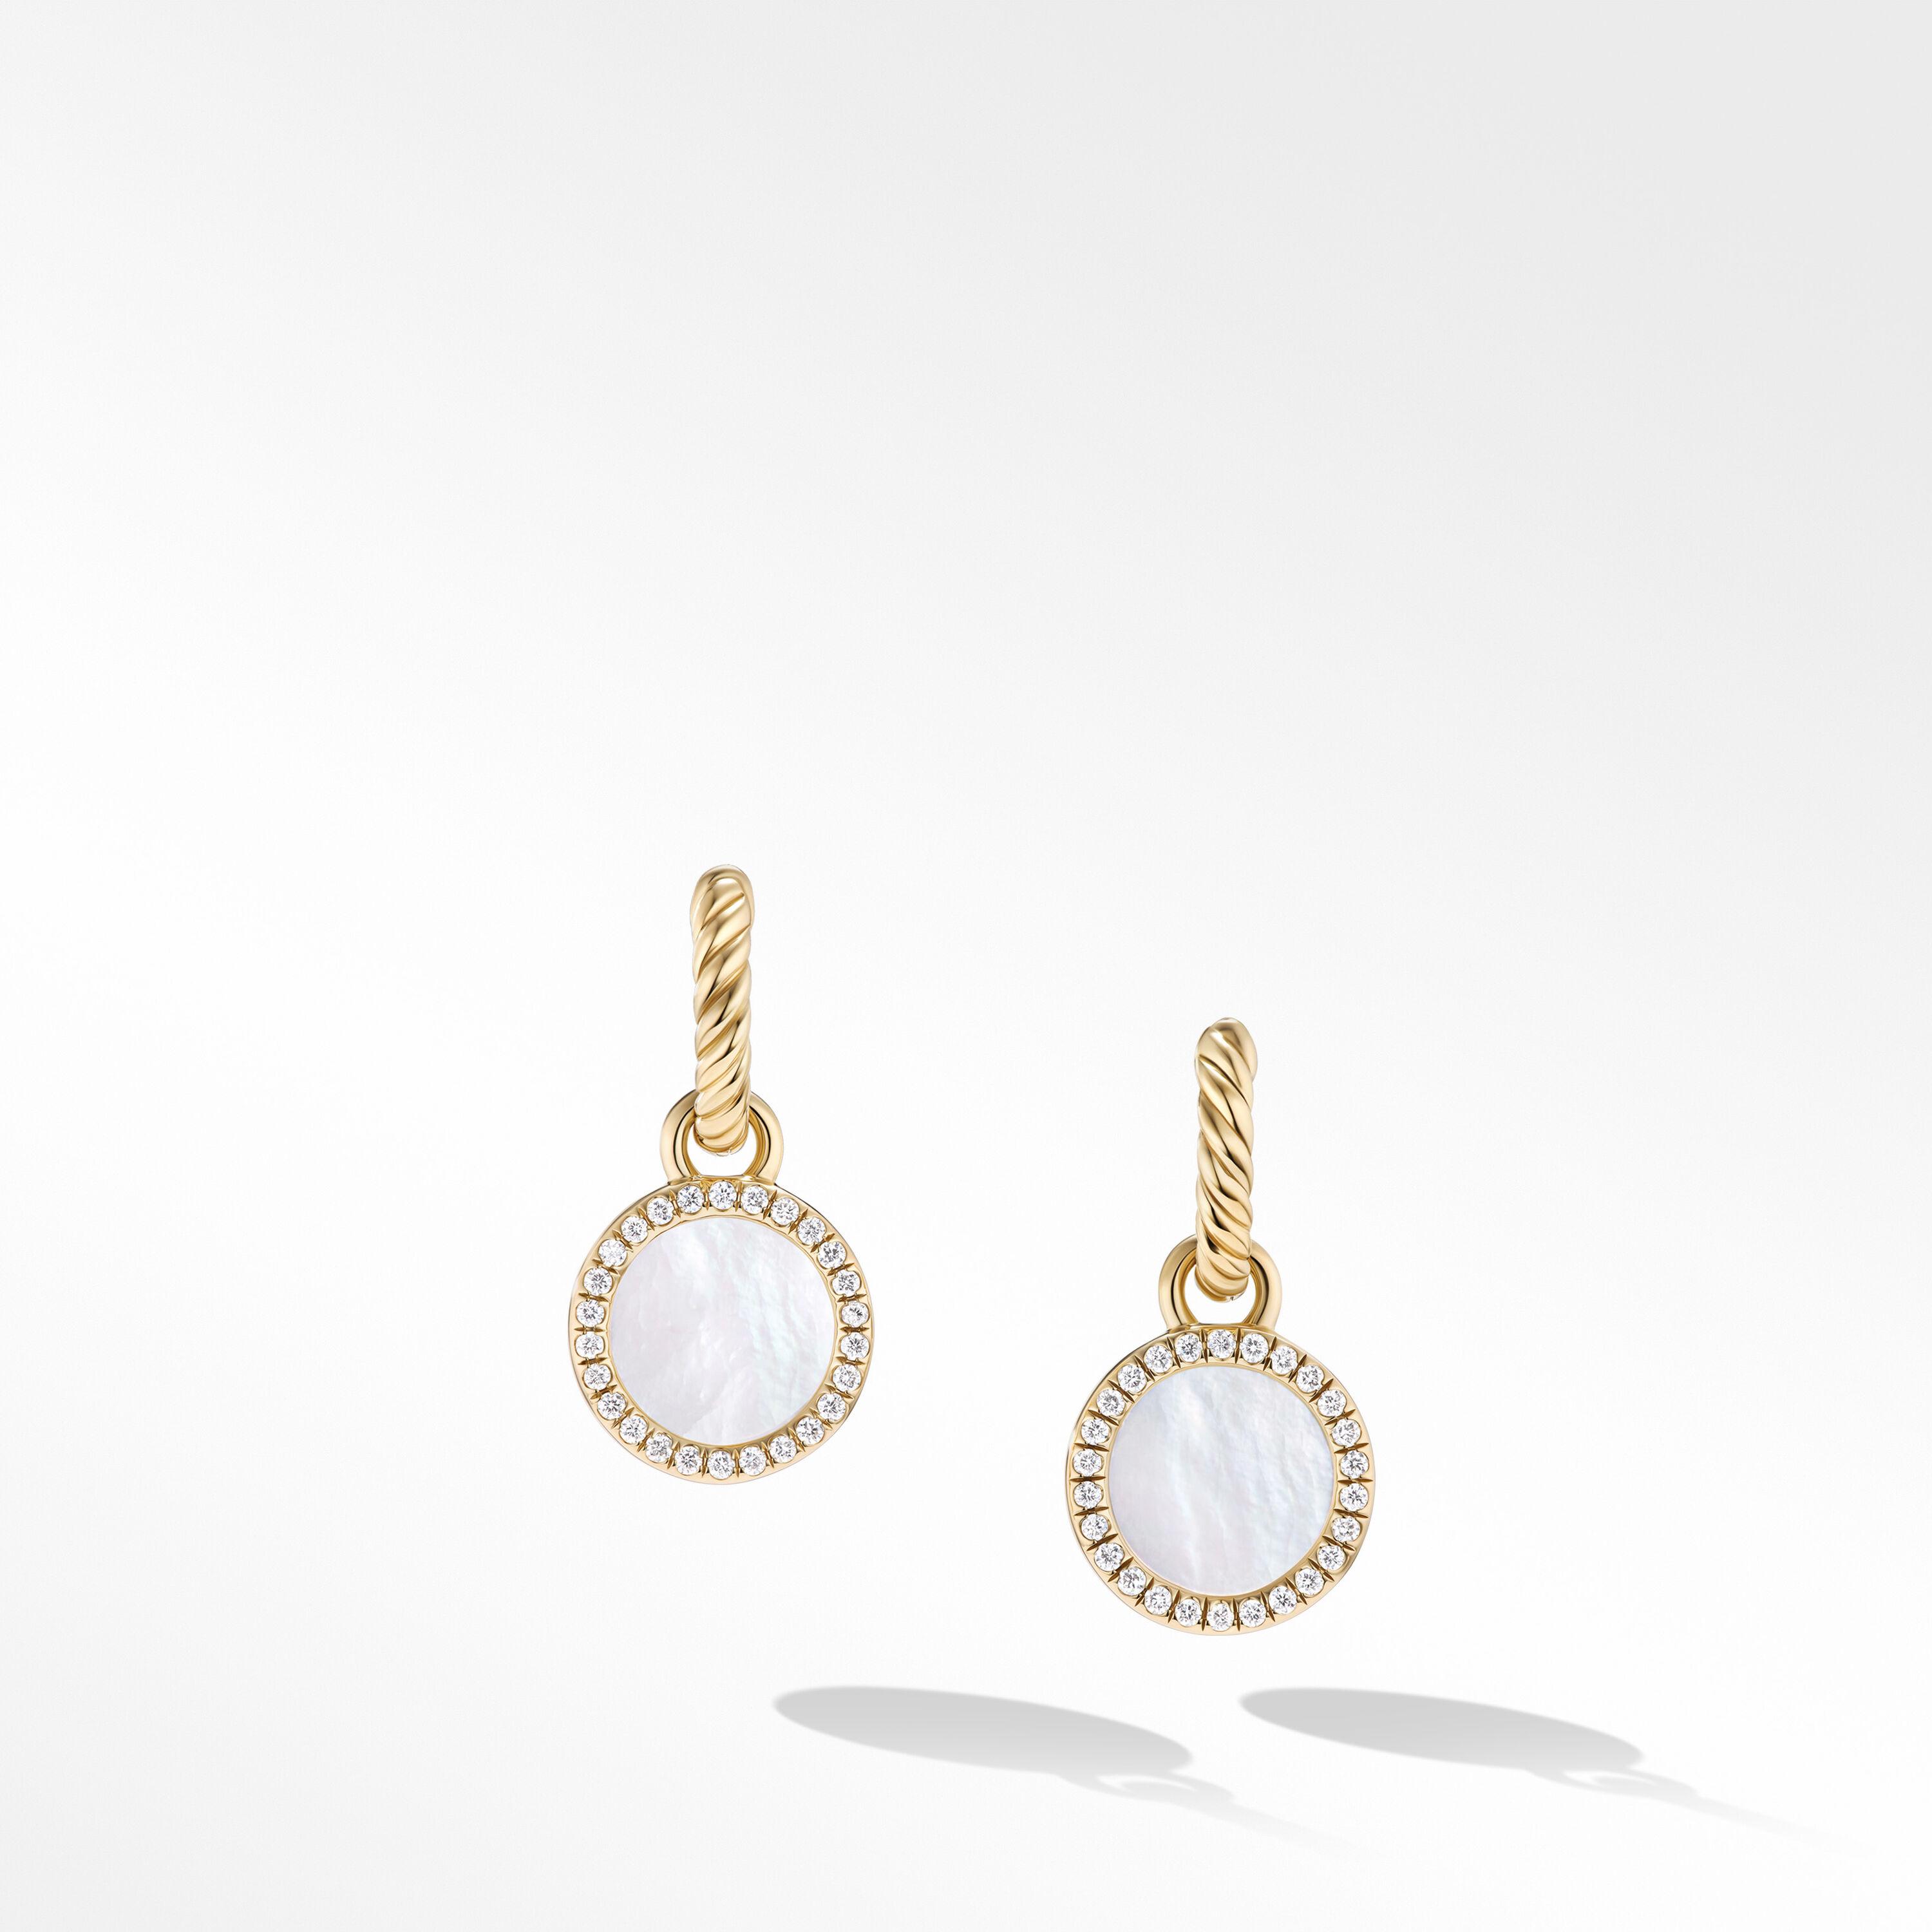 David Yurman Petite DY Elements Drop Earrings with Mother of Pearl and Pave Diamonds